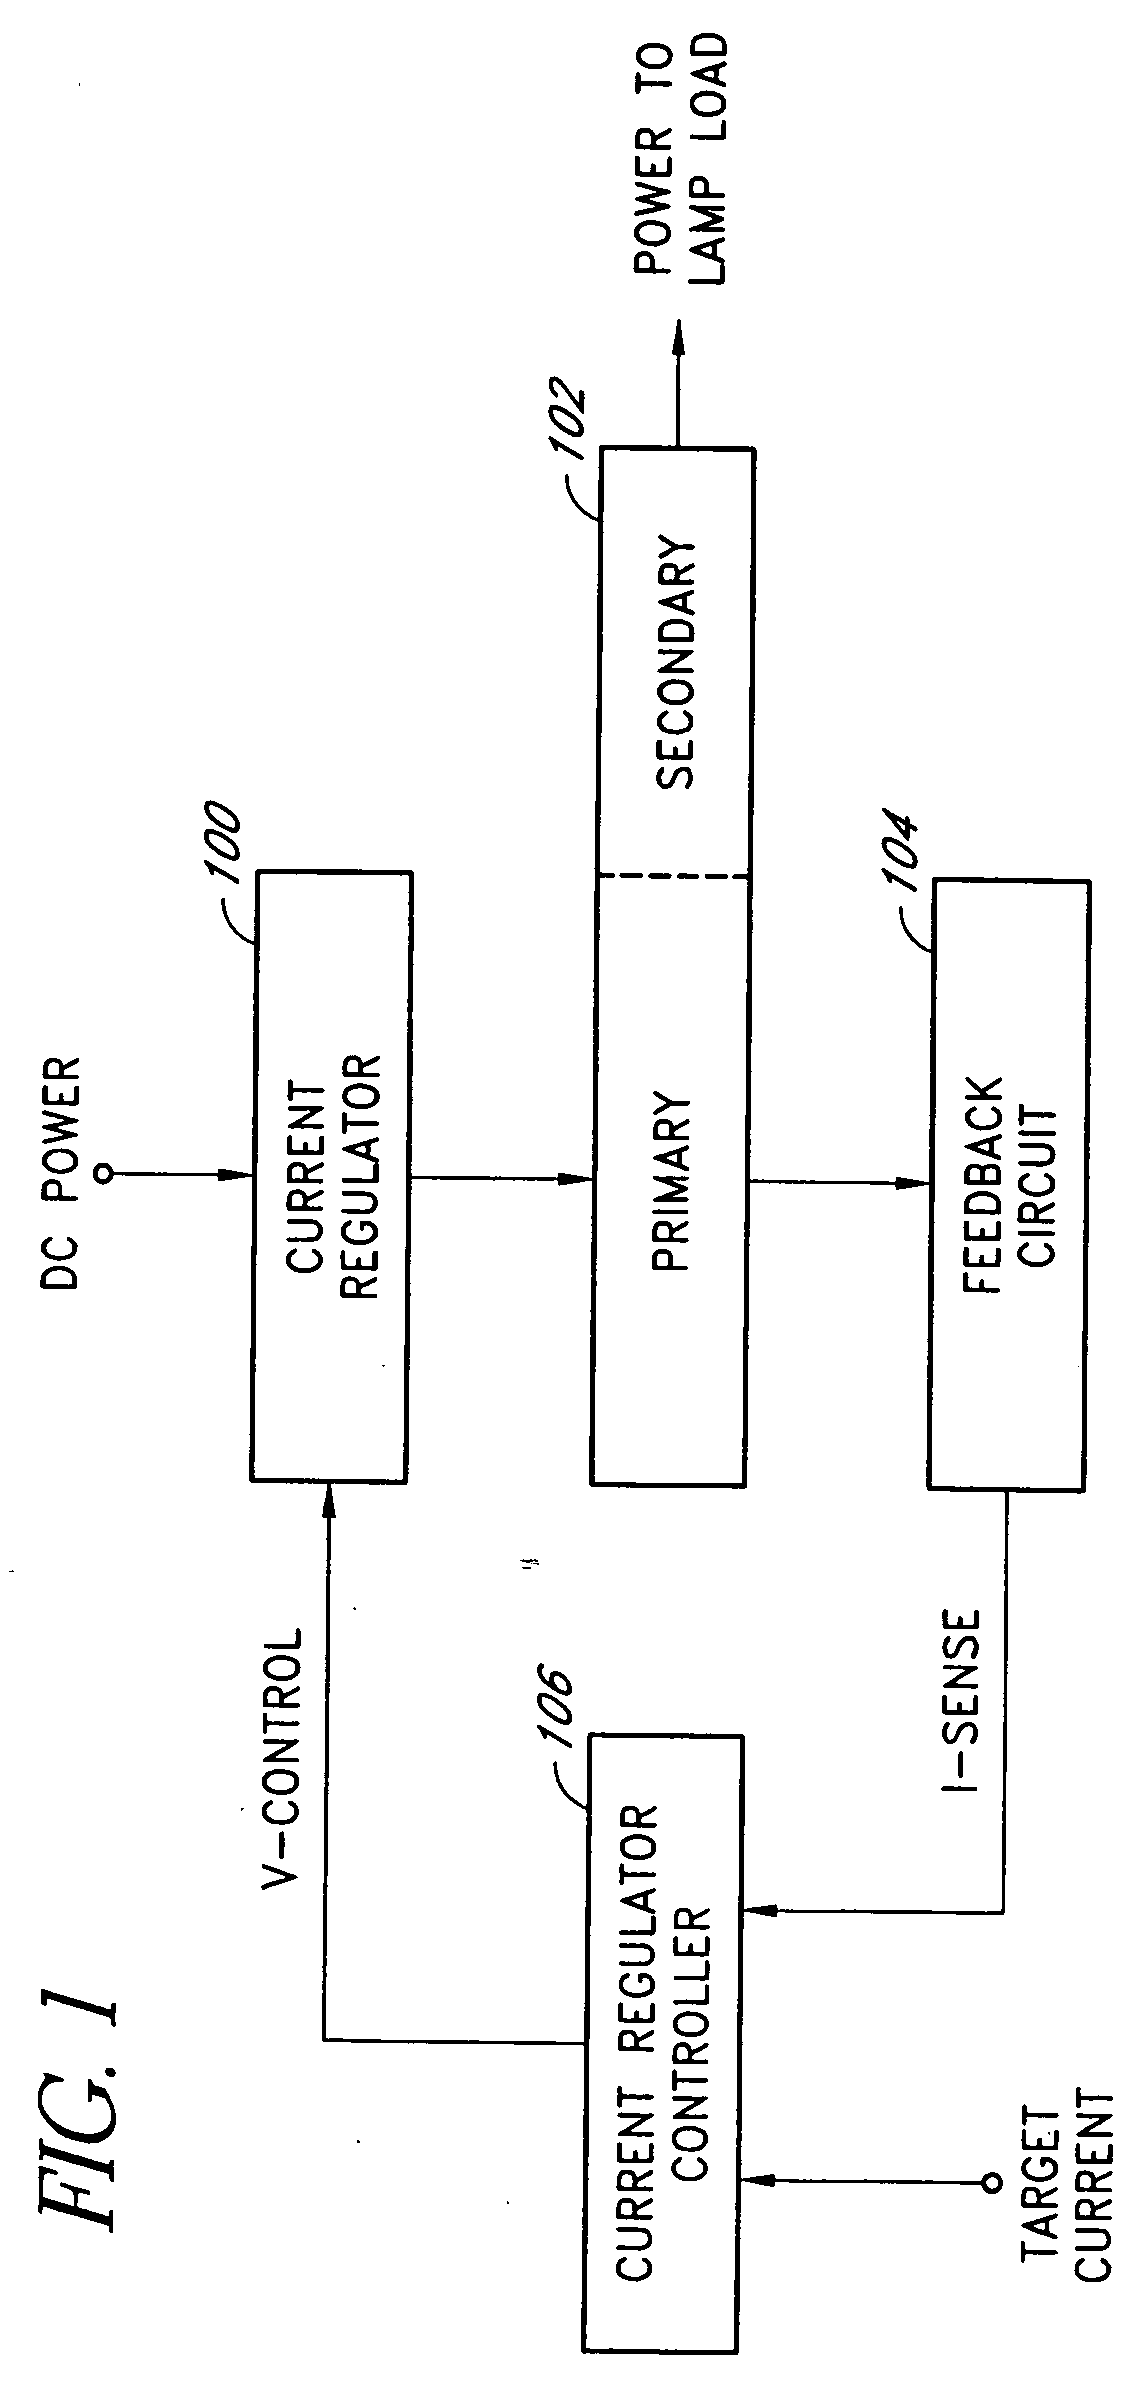 Inverter with two switching stages for driving lamp